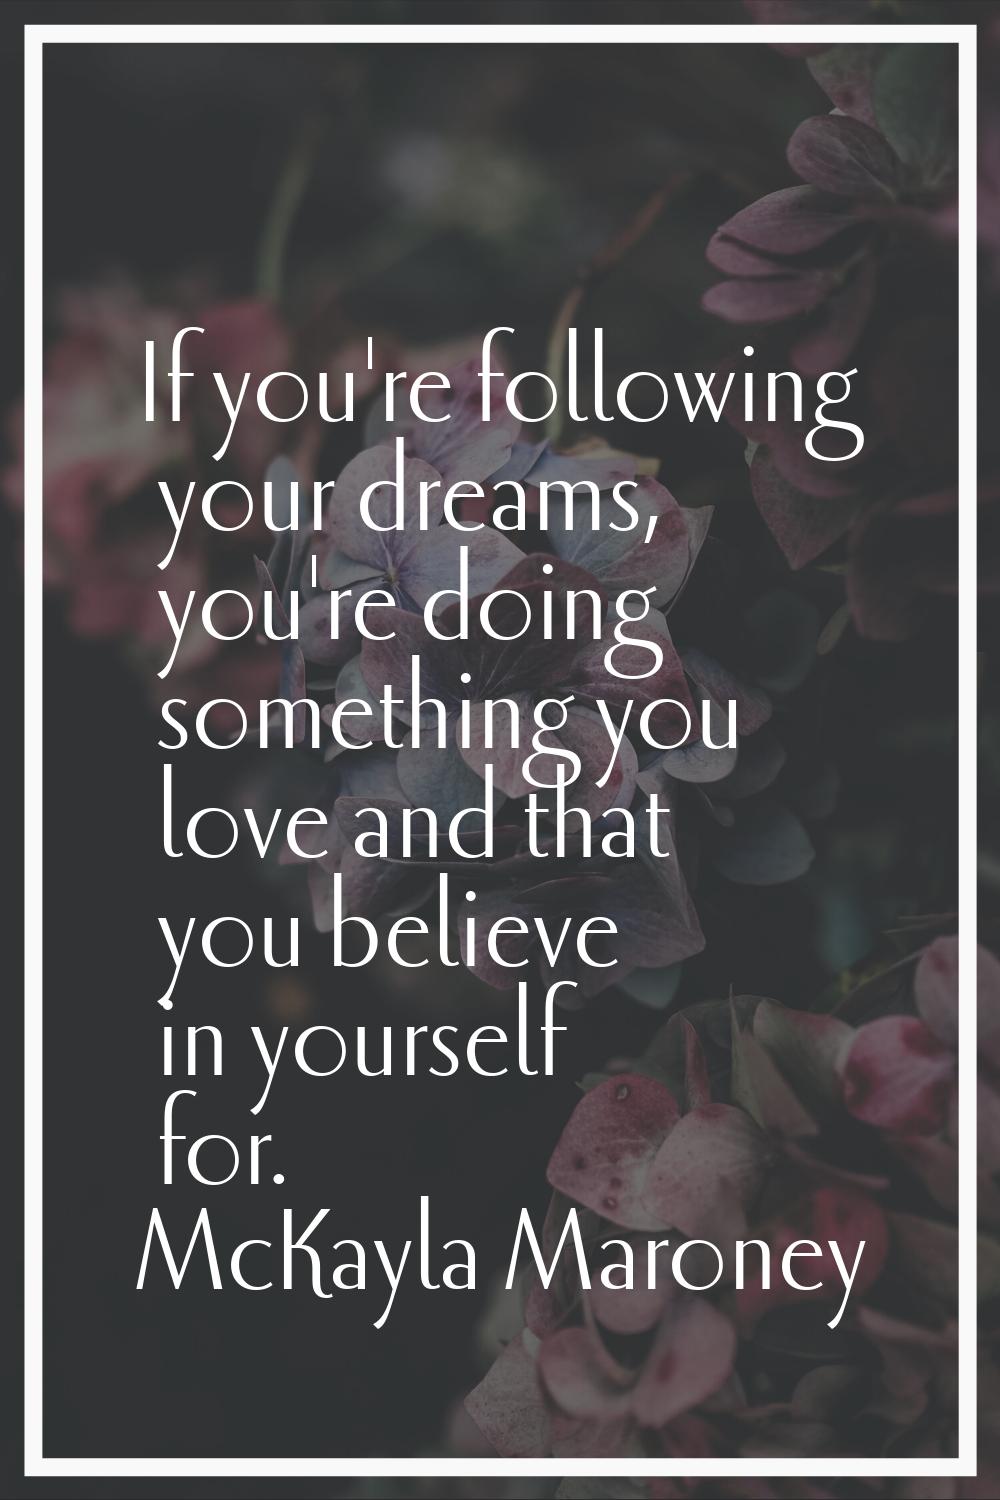 If you're following your dreams, you're doing something you love and that you believe in yourself f